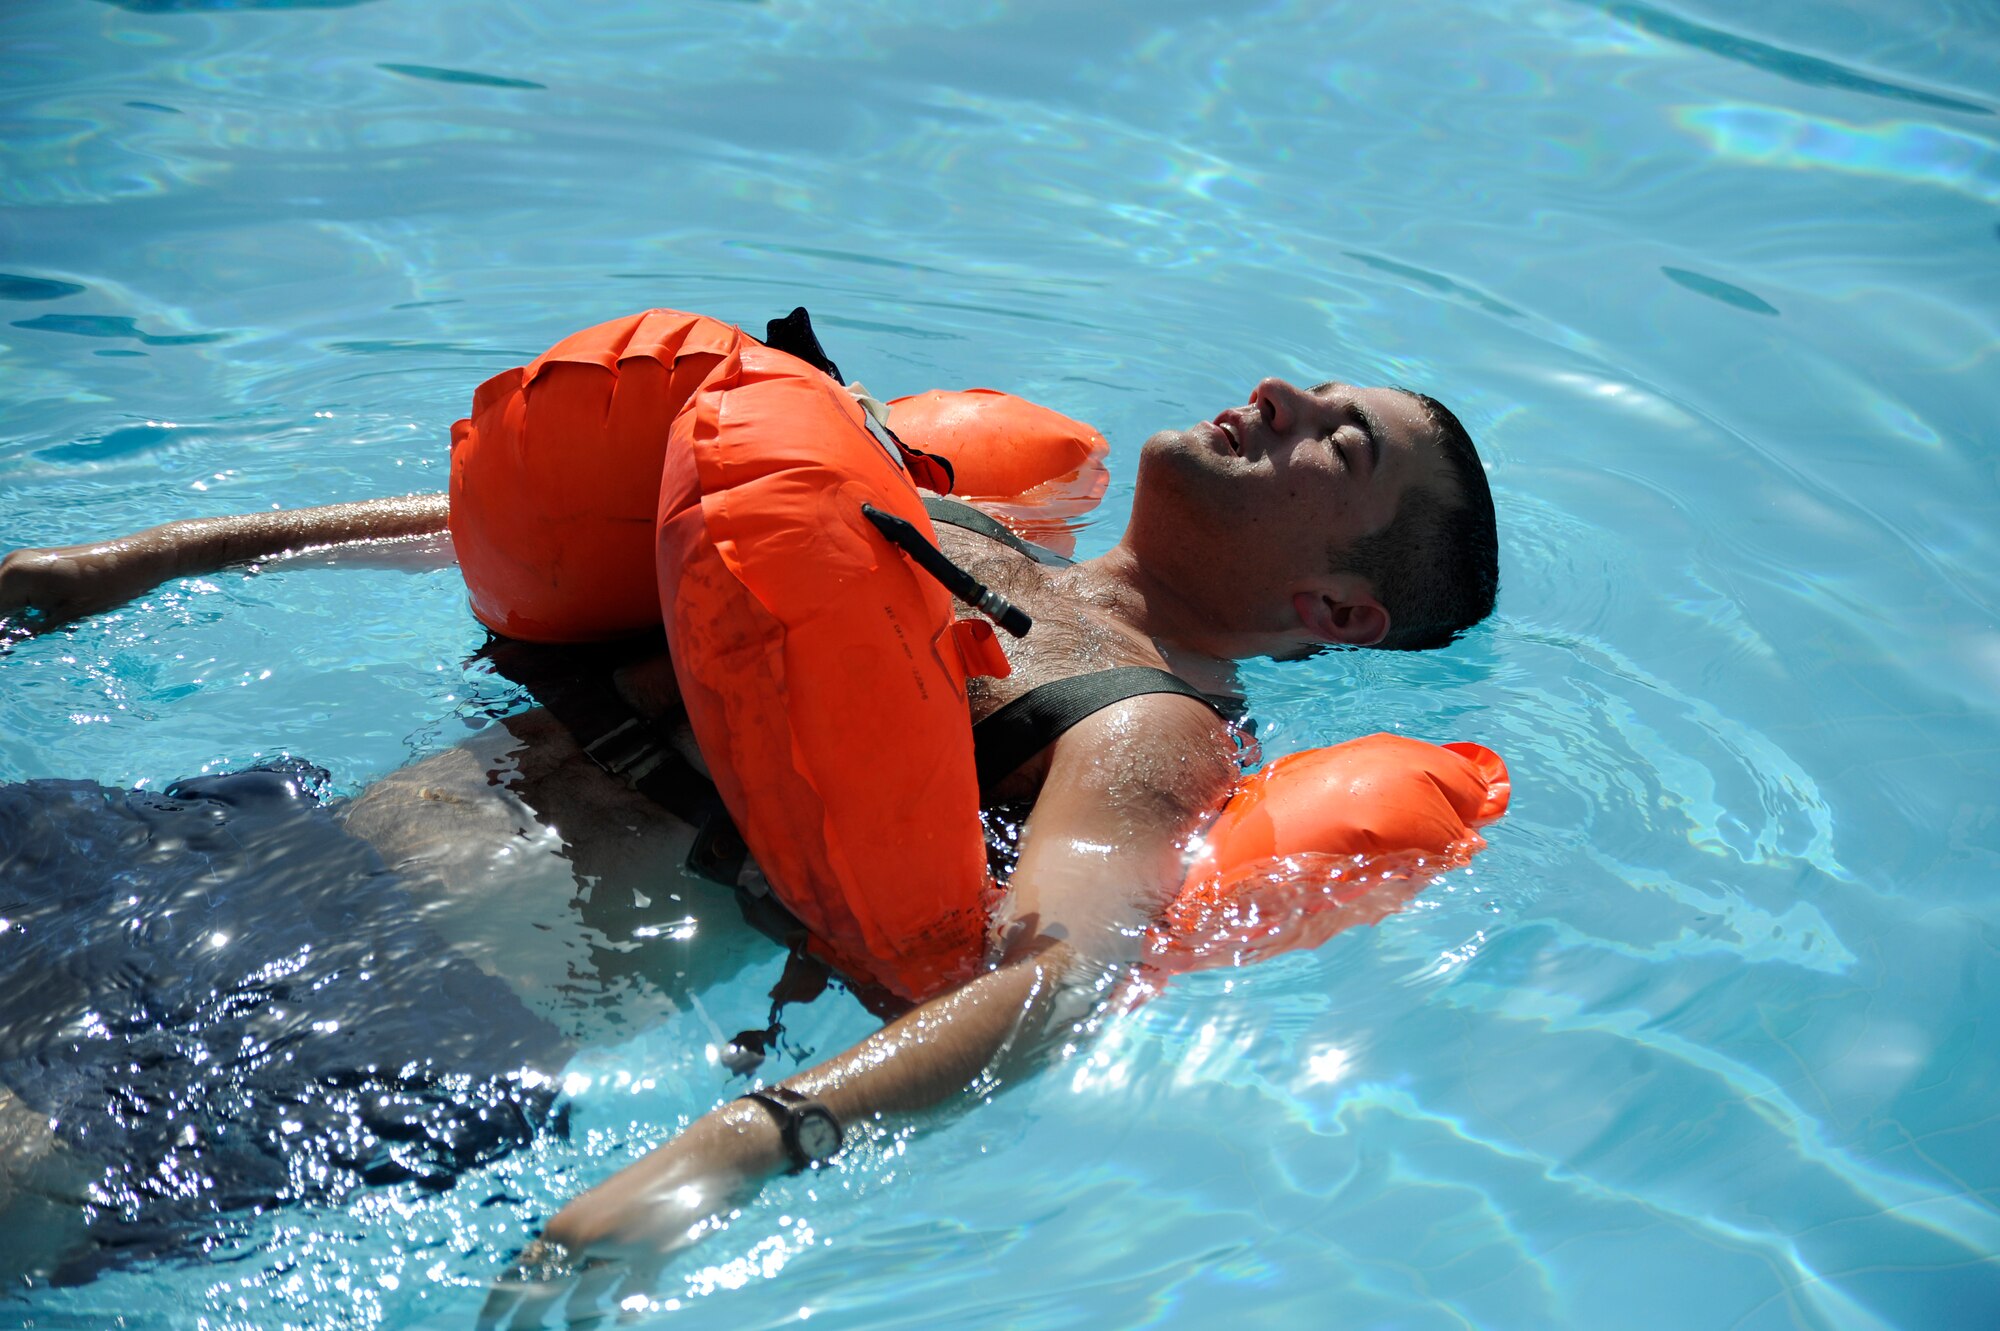 Senior Airman Anthony Serrels, 386th Expeditionary Civil Engineer Squadron, demonstrates proper use of a life vest here Aug. 29, 2013. Serrels is training host-nation aircrew on water survival techniques with different life support equipment. Here he is showing floating with a life vest to conserve energy. Serrels, a native of La Peer, Mich., is deployed out of the 110th Airlift Wing, Battle Creek, Mich., Air National Guard unit. (U.S. Air Force photo by Master Sgt. Christopher A. Campbell)